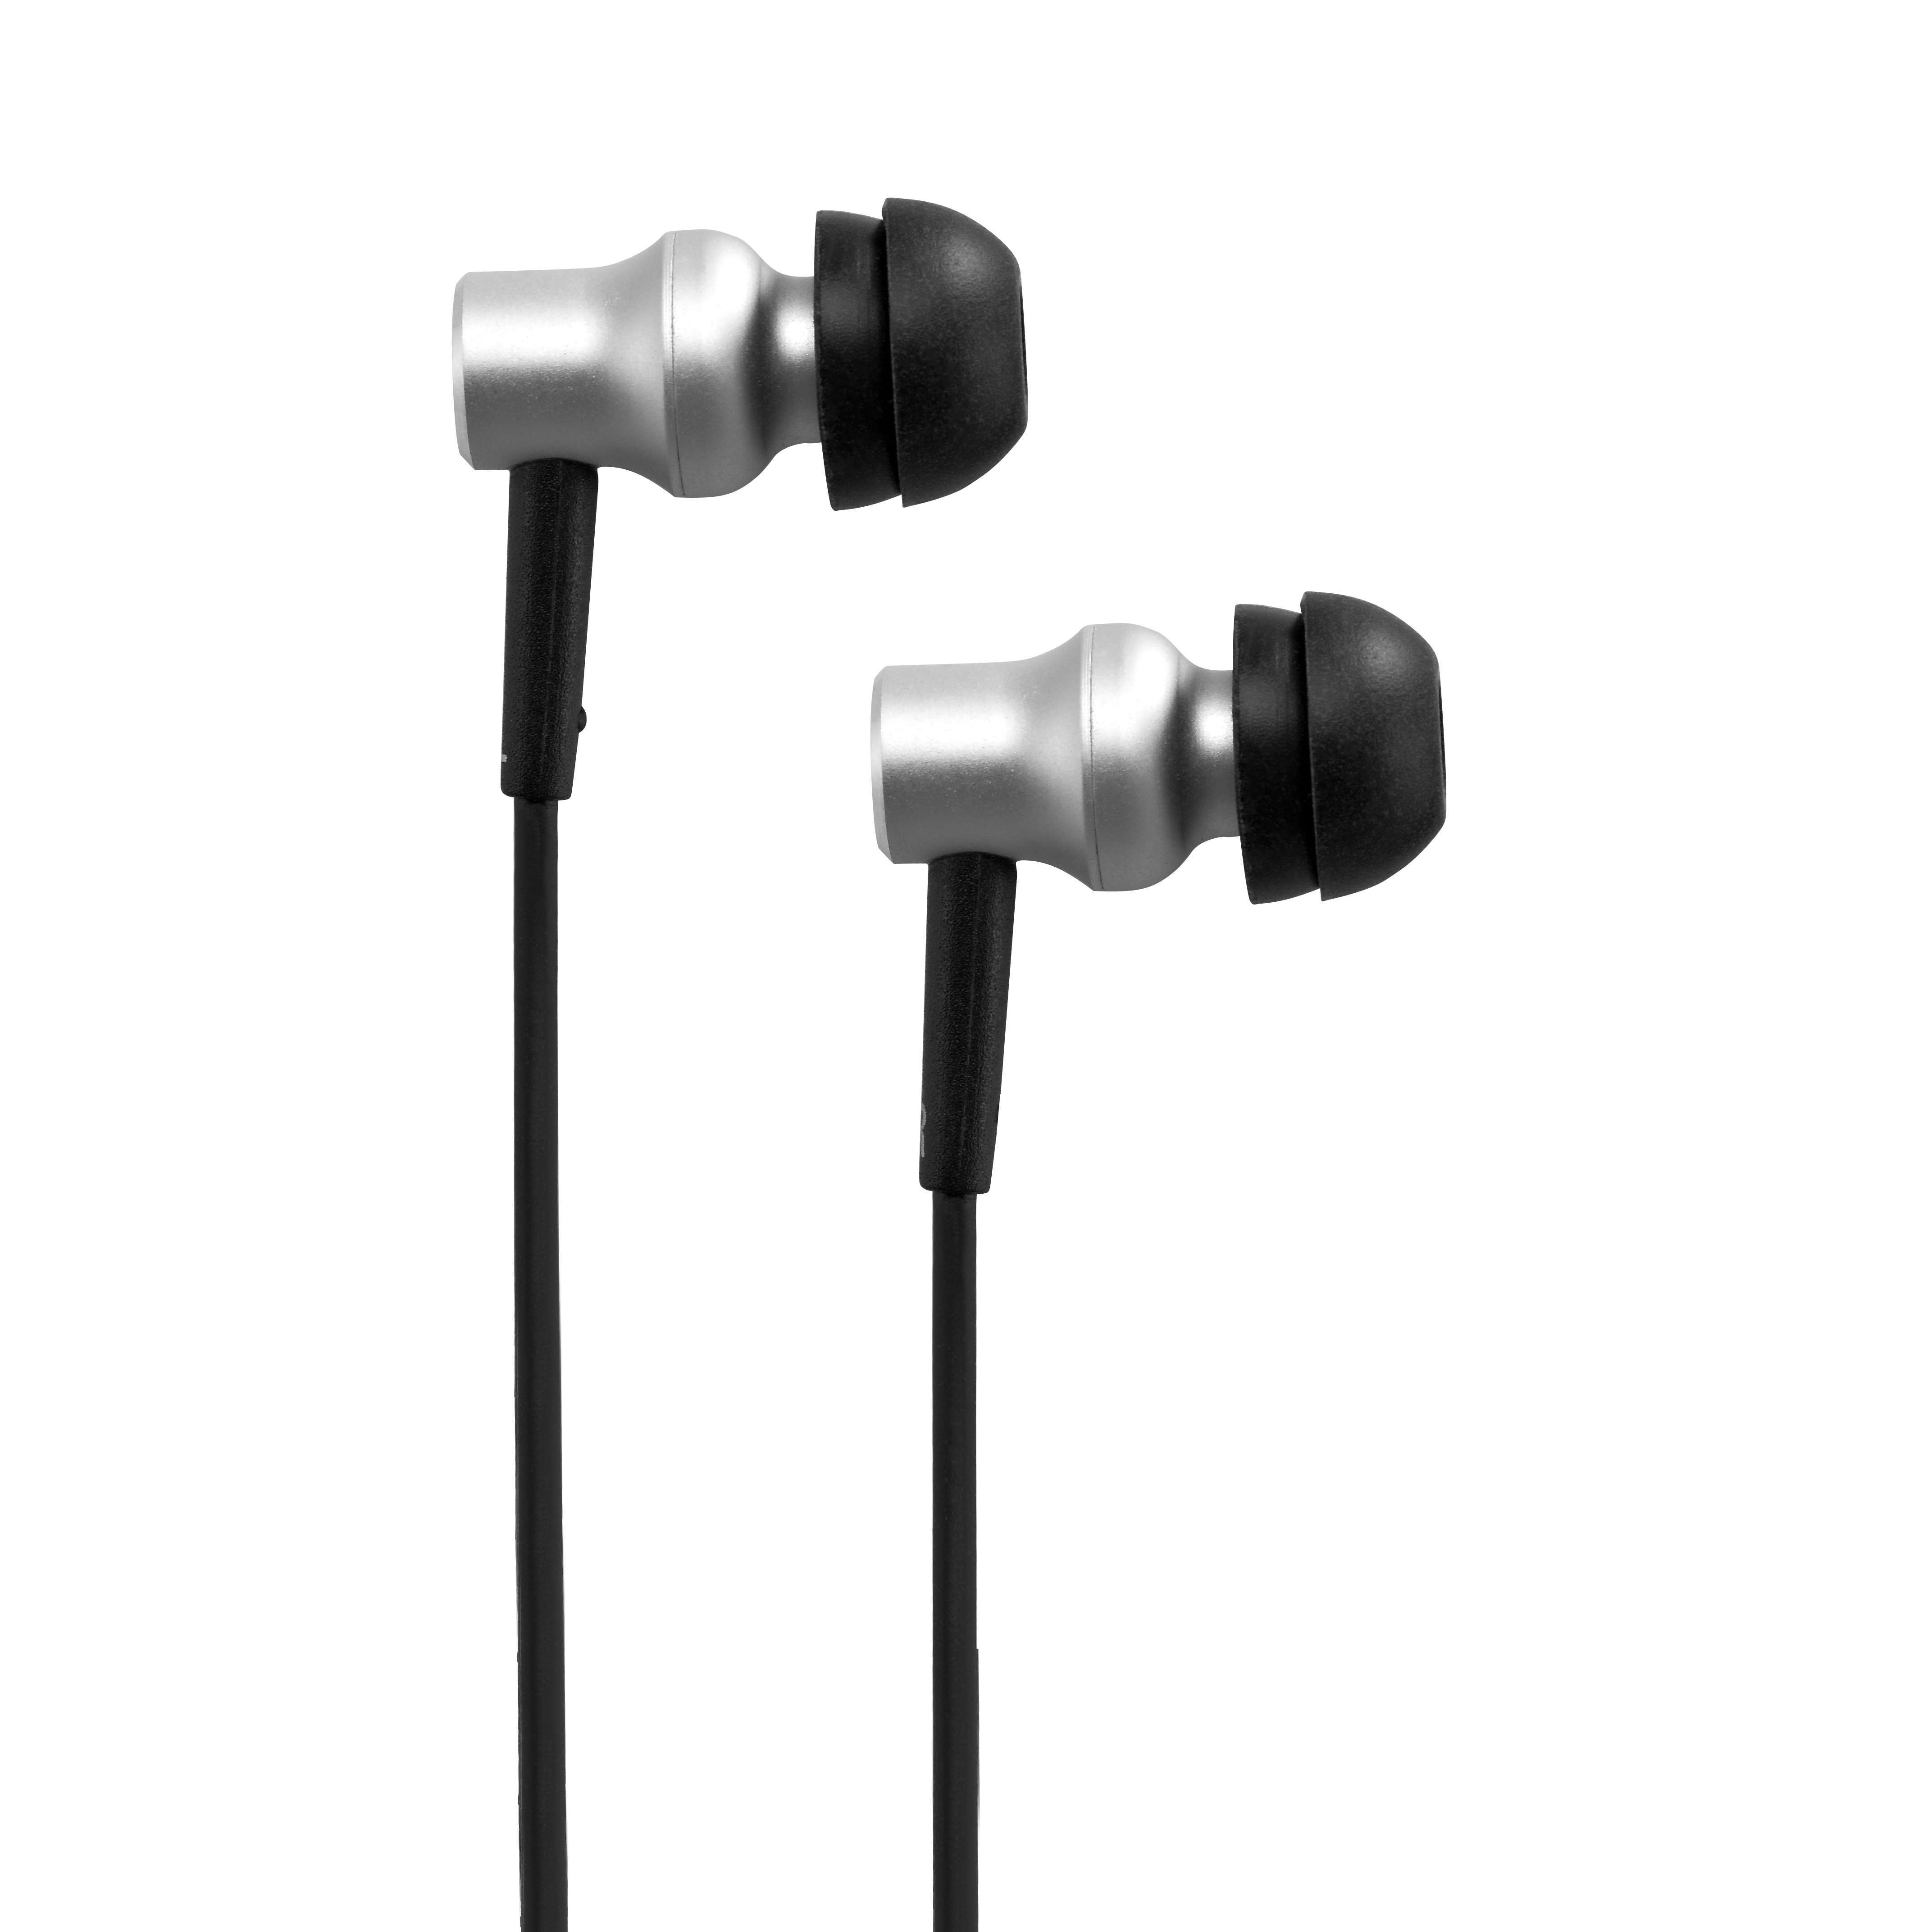 Buy HIFIMAN RE400 with Upgraded Cable Earphone at HiFiNage in India with warranty.